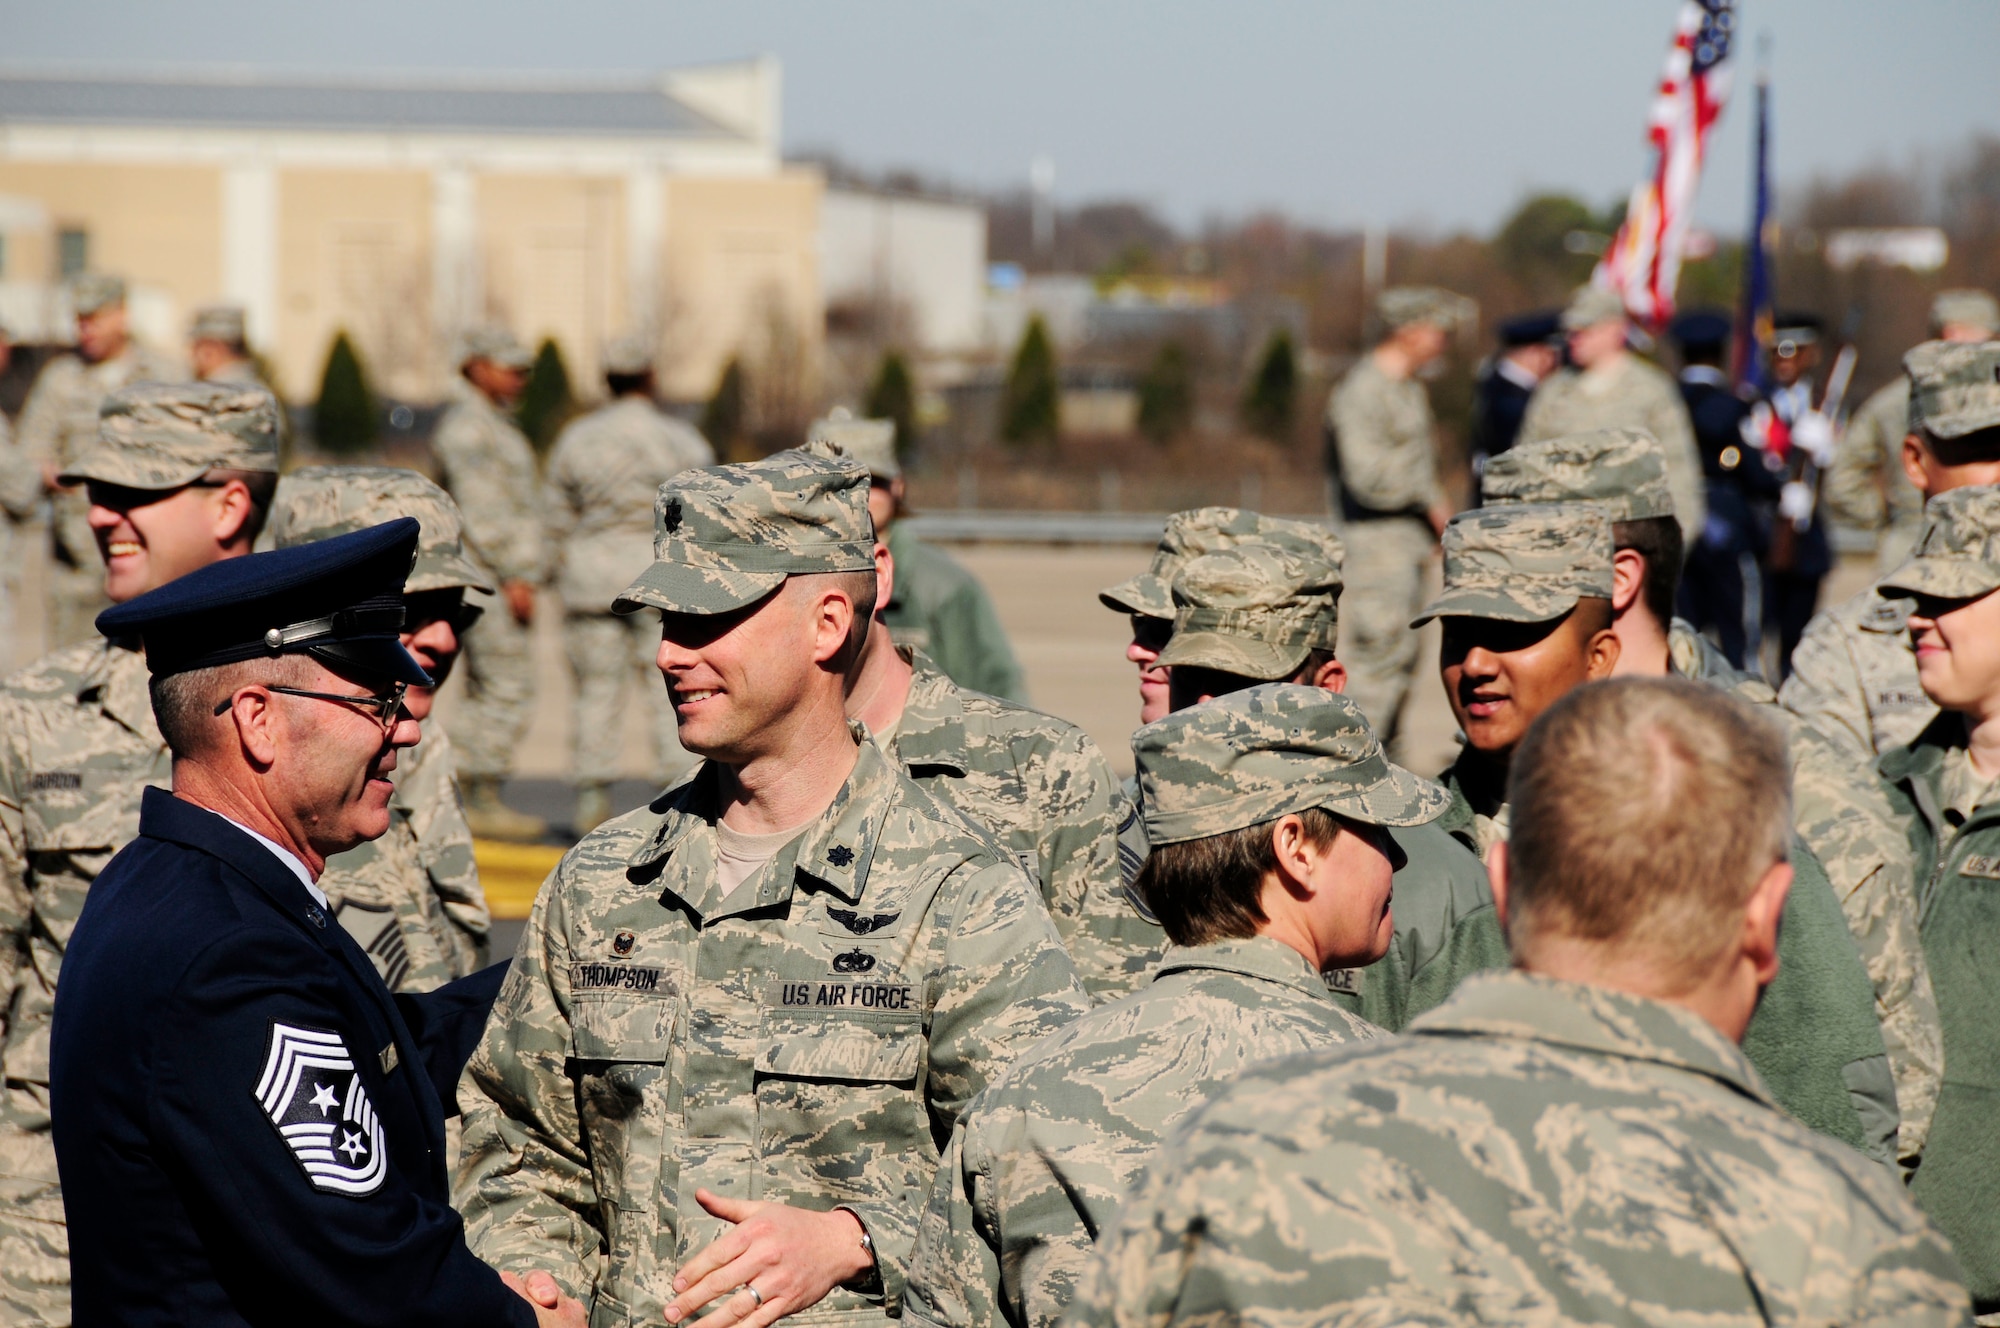 U.S. Air Force State Command Chief Master Sgt. Michael D. Stanley is congratulated by Lt. Col. Lee Thompson, commander, 145th Logistics Readiness Squadron, after a Change of Authority ceremony held at the North Carolina Air National Guard base, Charlotte Douglas Intl. Airport, Feb. 8, 2015. Serving 33 years in the military, Stanley takes on the responsibility of State Command Chief, the highest enlisted position in the North Carolina Air National Guard. (U.S. Air National Guard photo by Senior Airman Laura Montgomery, 145th Public Affairs/Released)